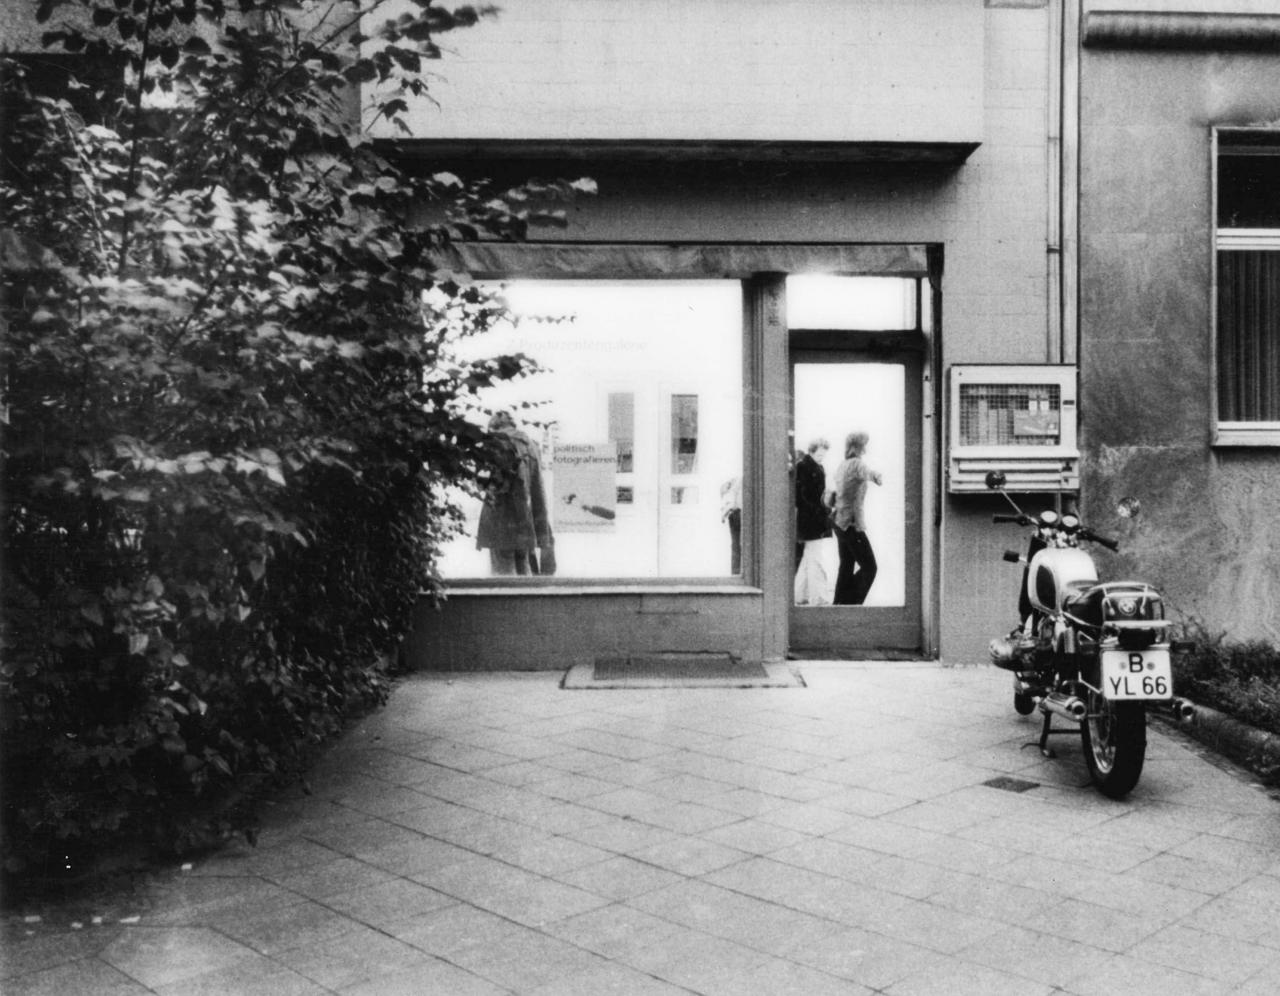 Black and white photo shows the street view of a gallery space. In front of it is a motorcycle.